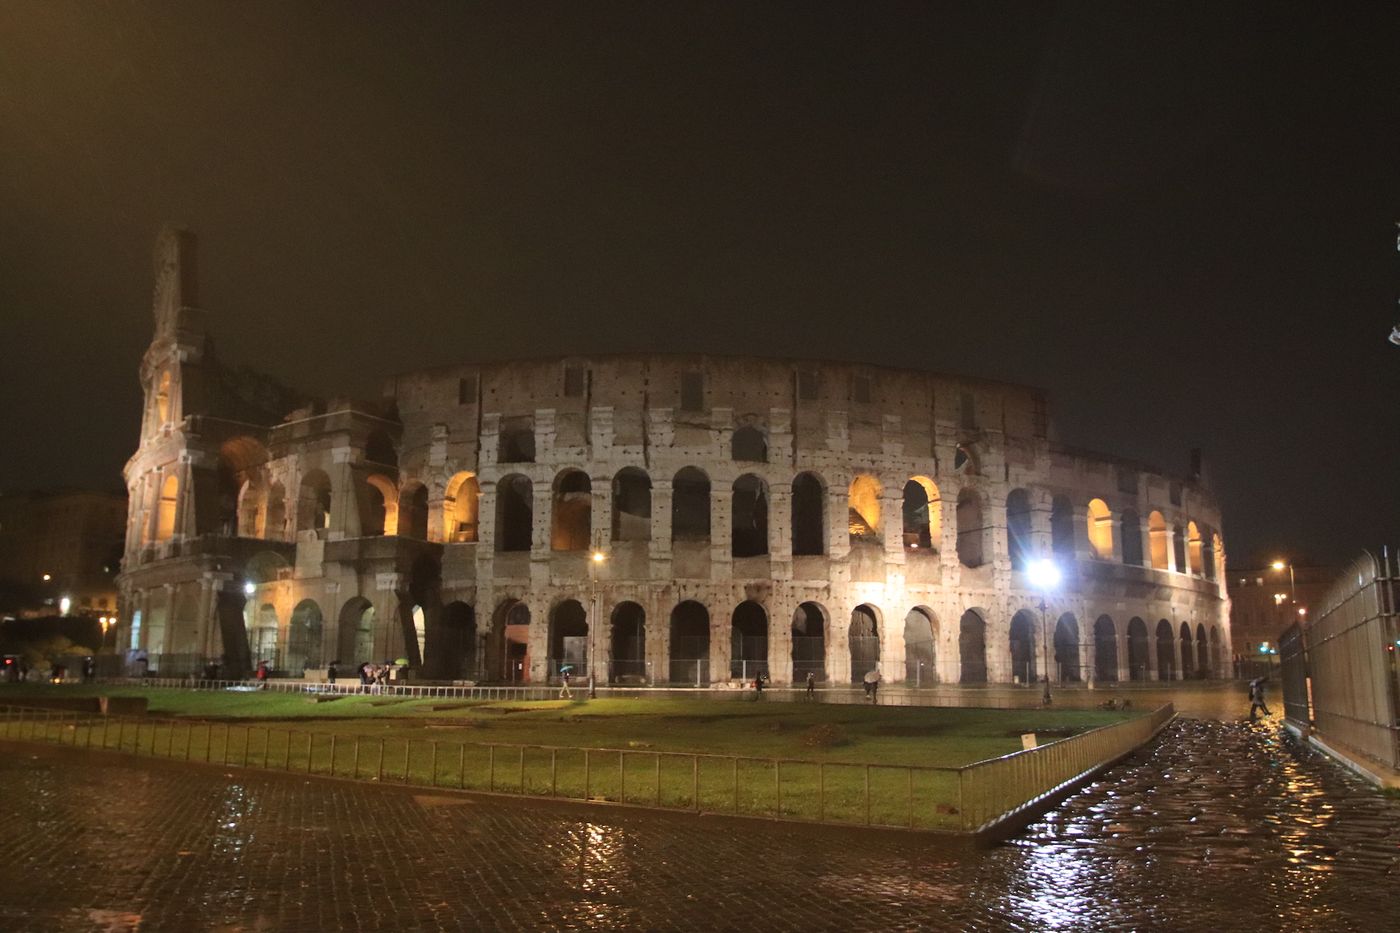 The Colosseum in Rome, Italy / Credit: Carmen Leitch